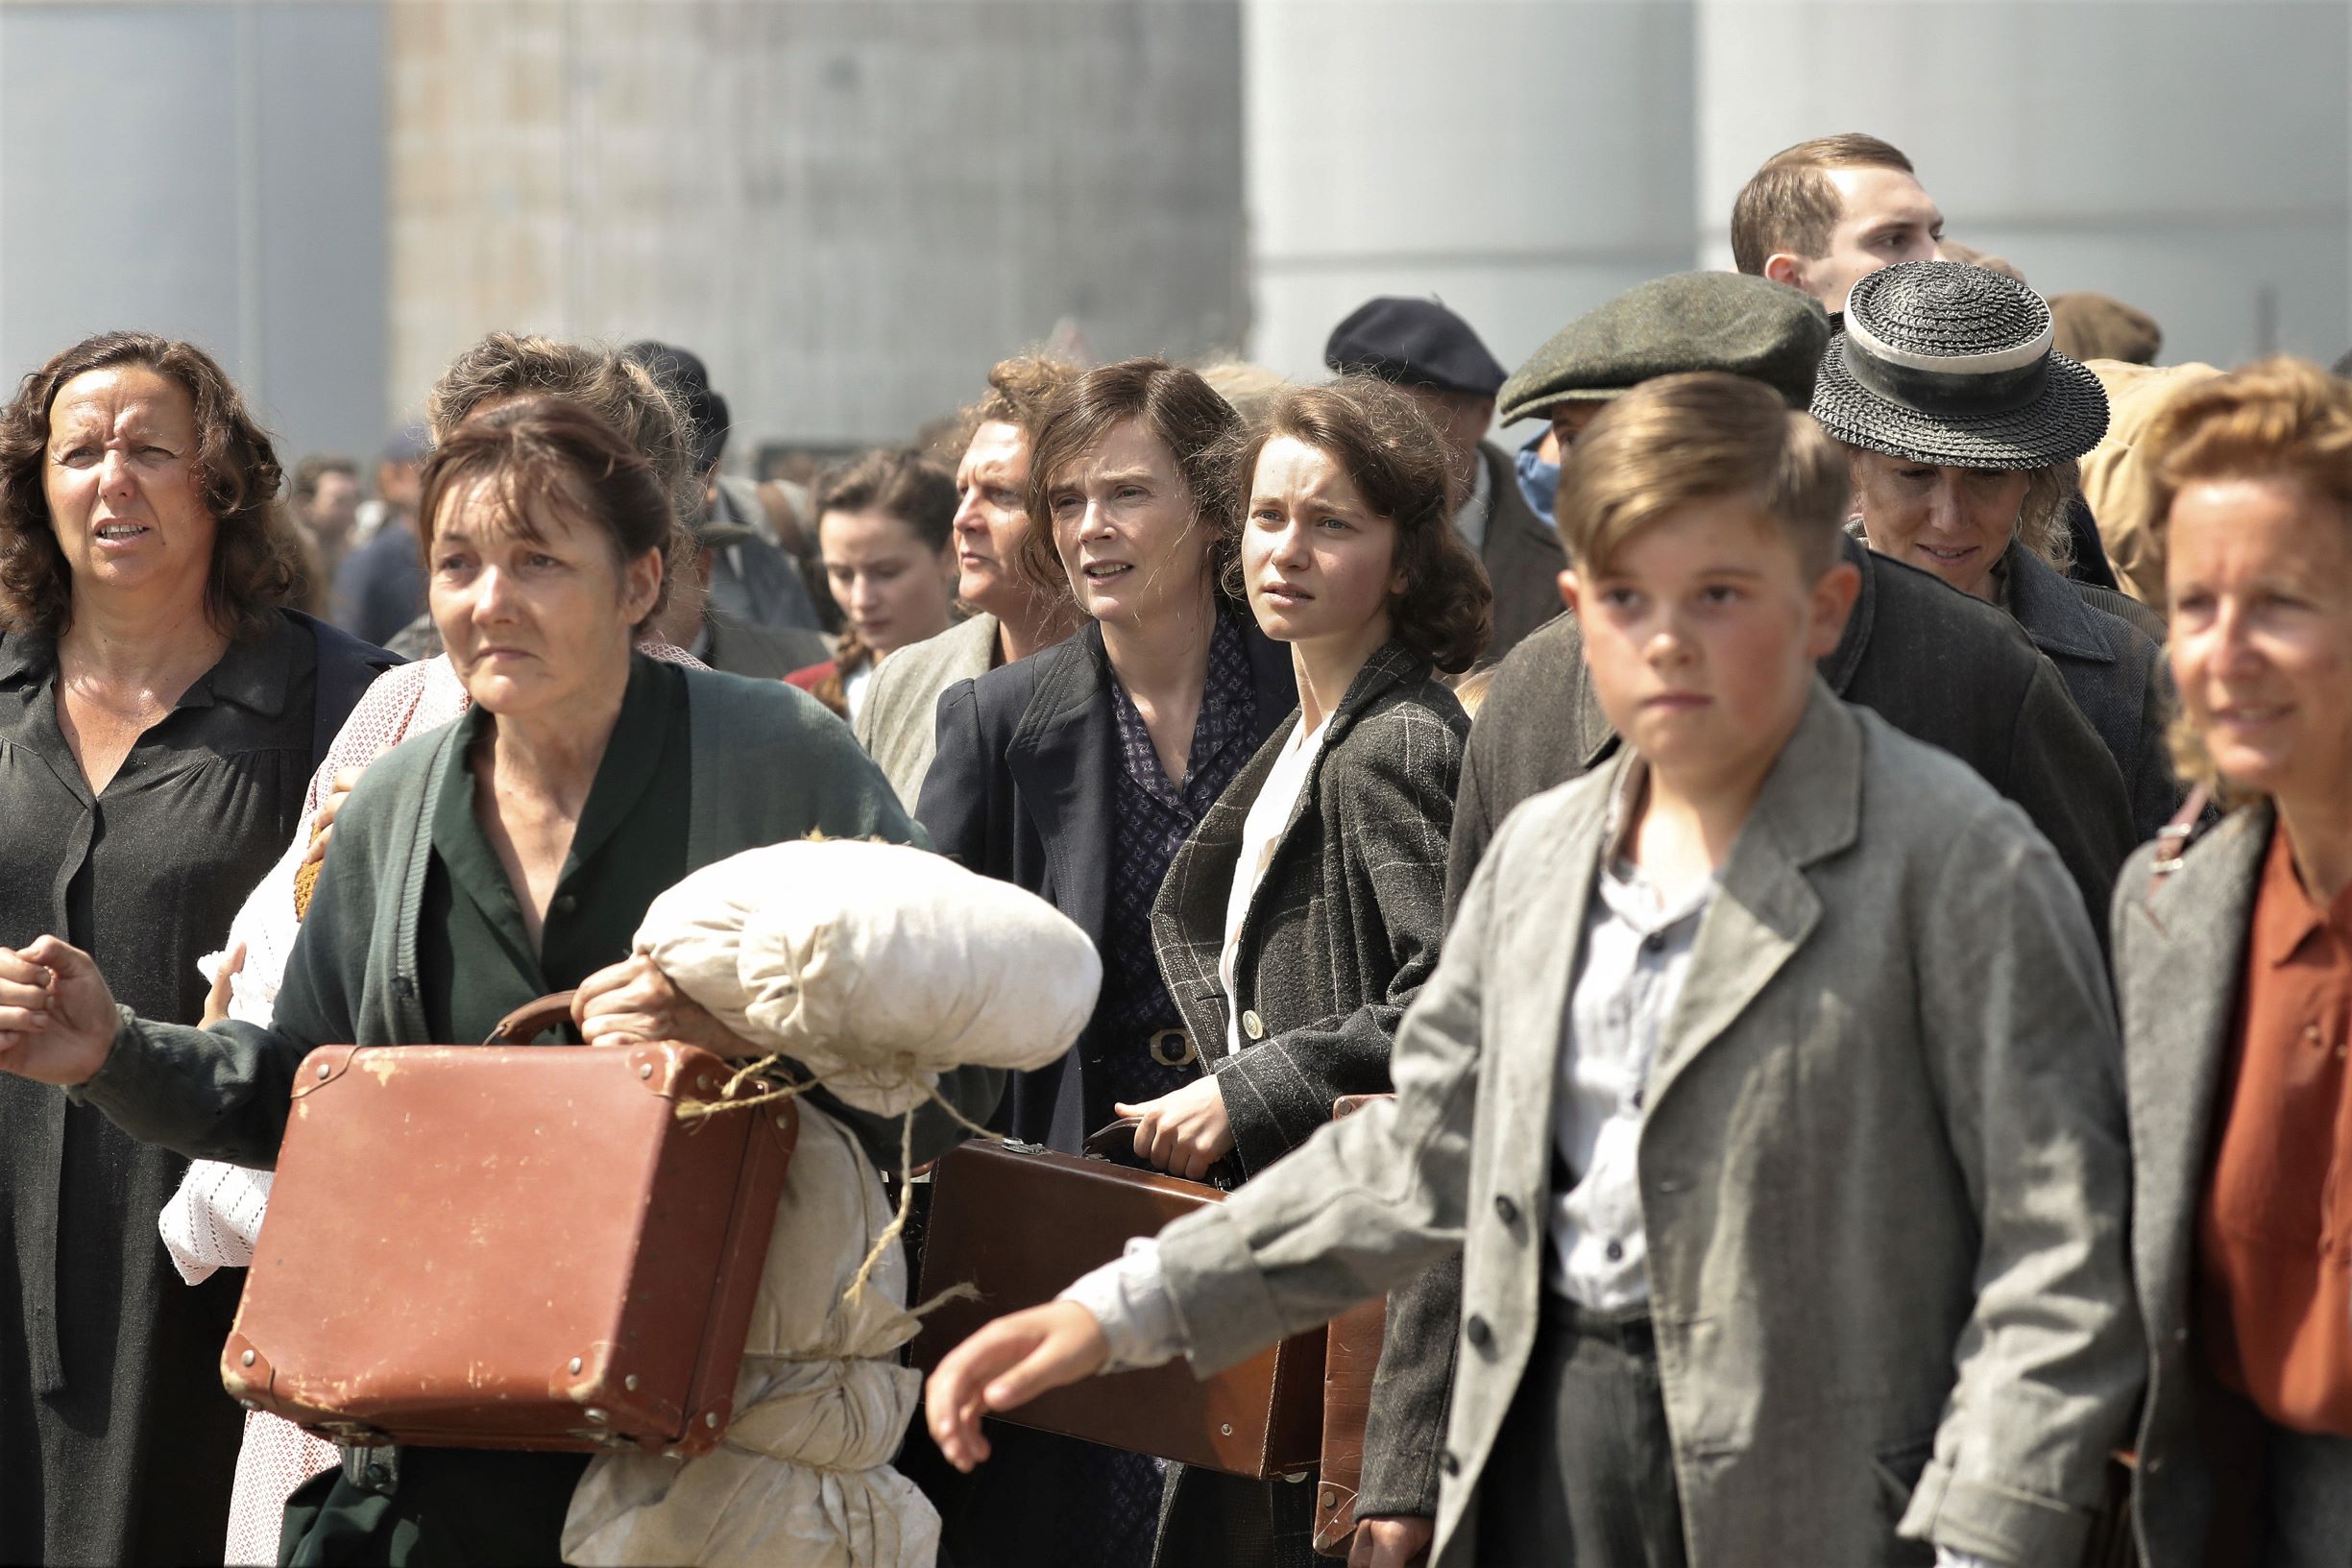 French refugees on the run in the film De Gaulle.